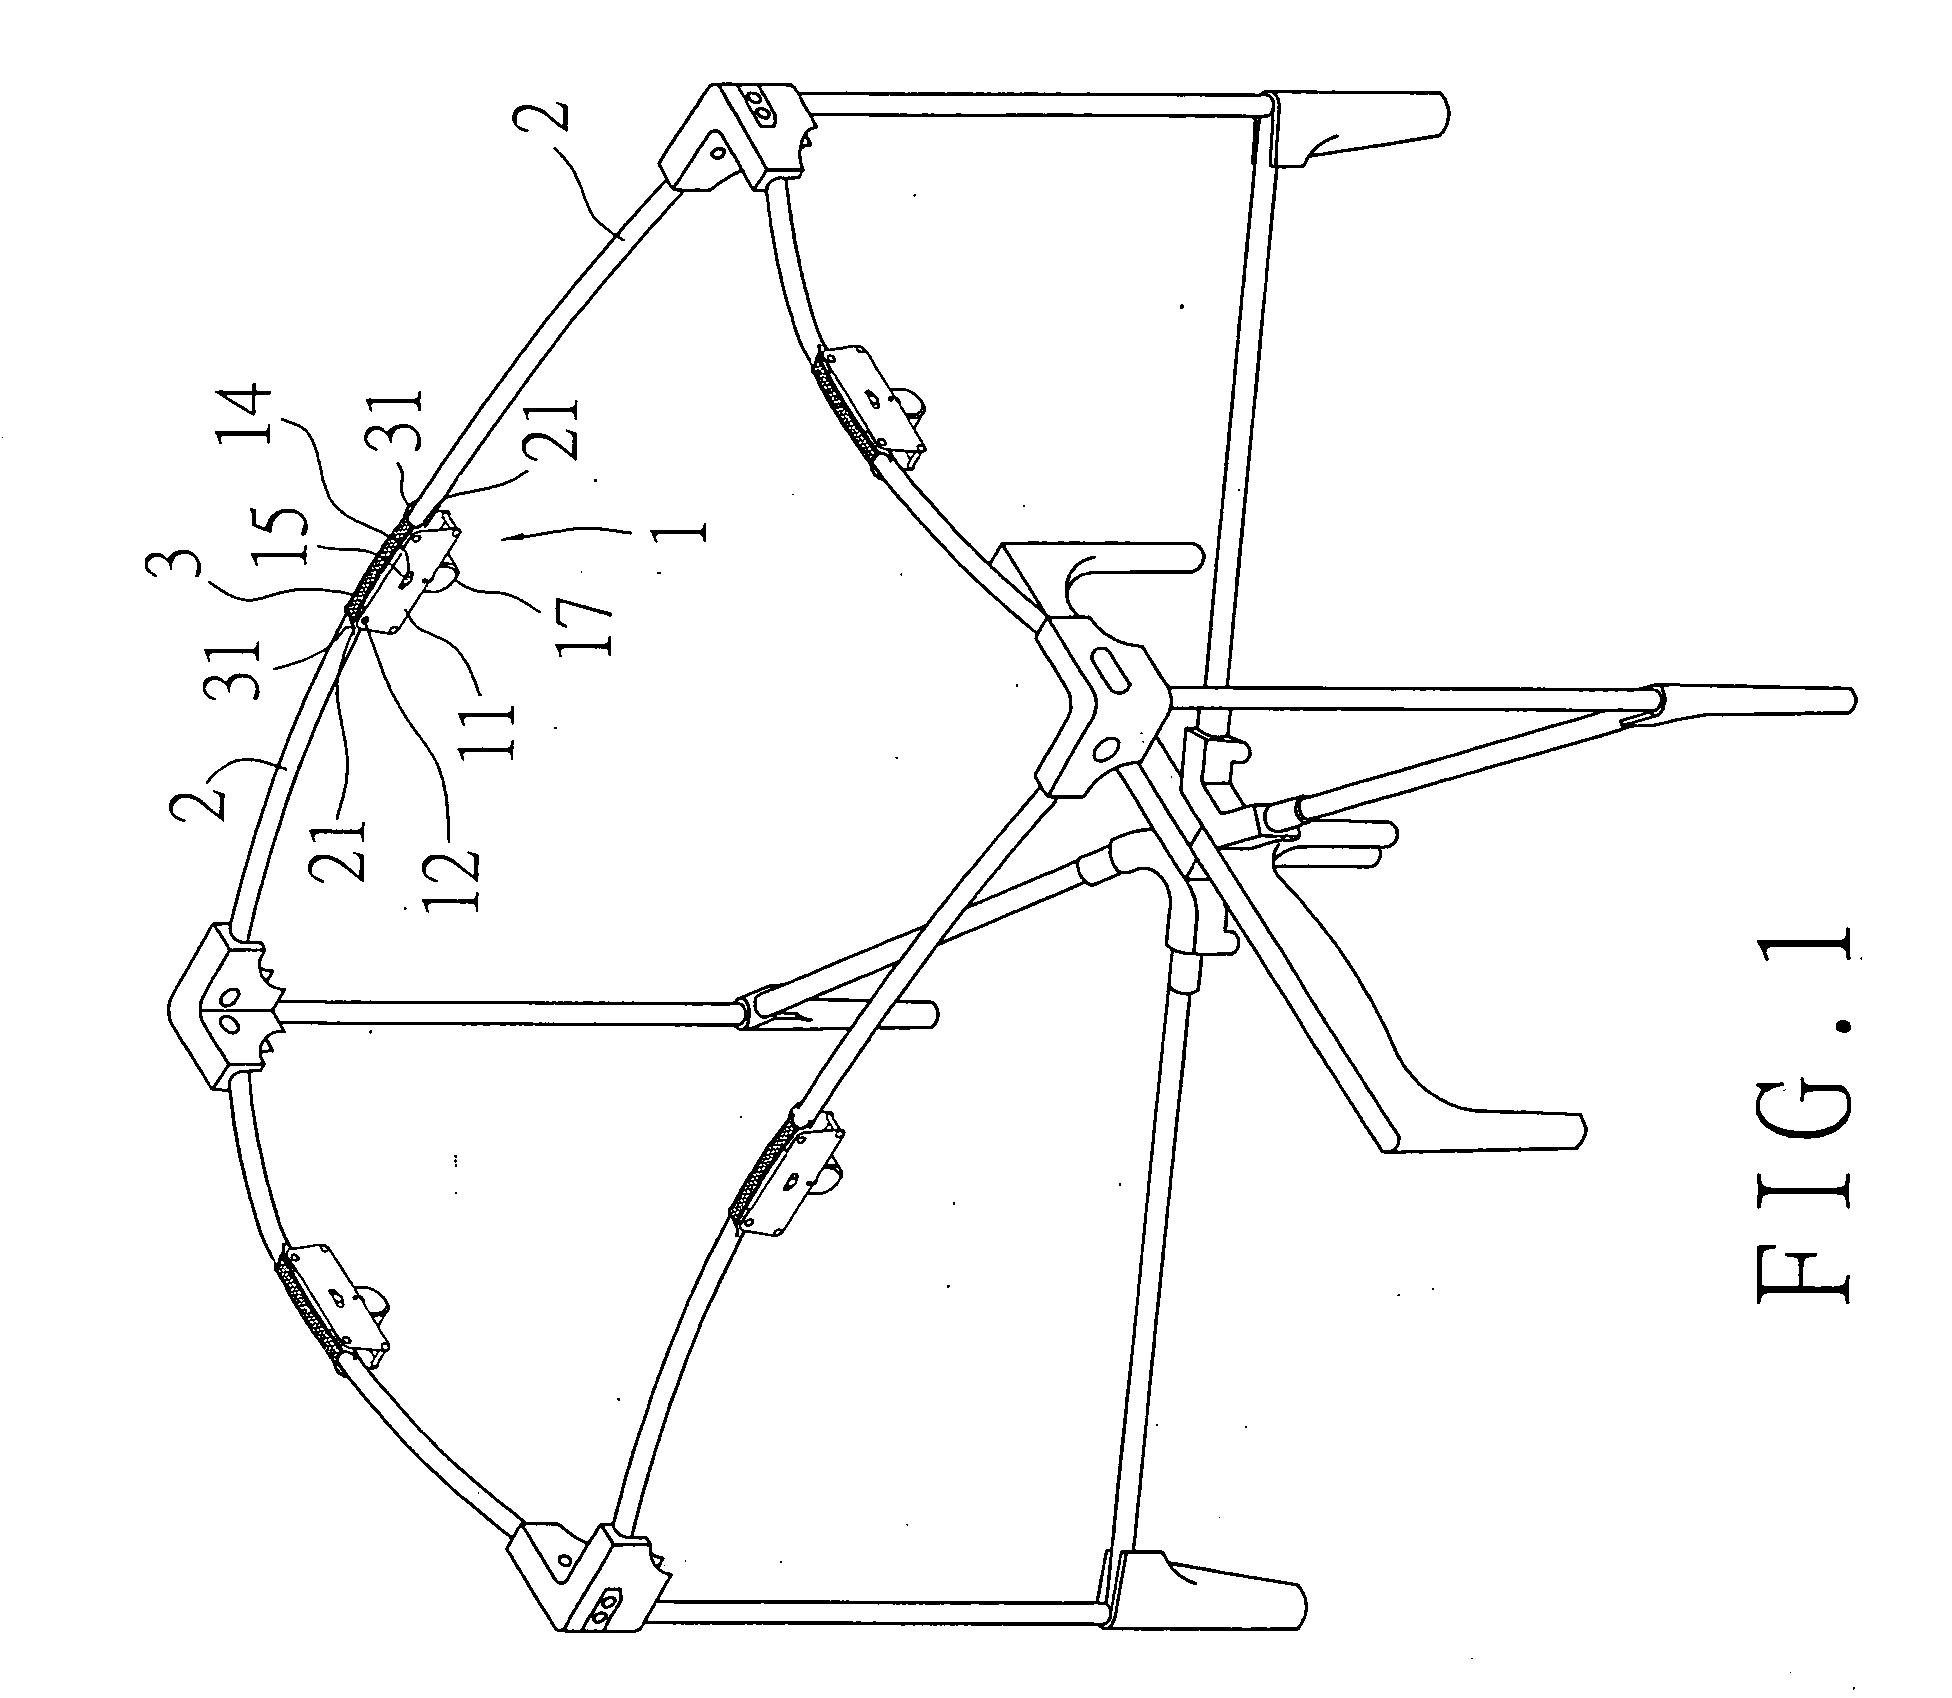 Security structure of a baby mesh bed to prevent accident folding